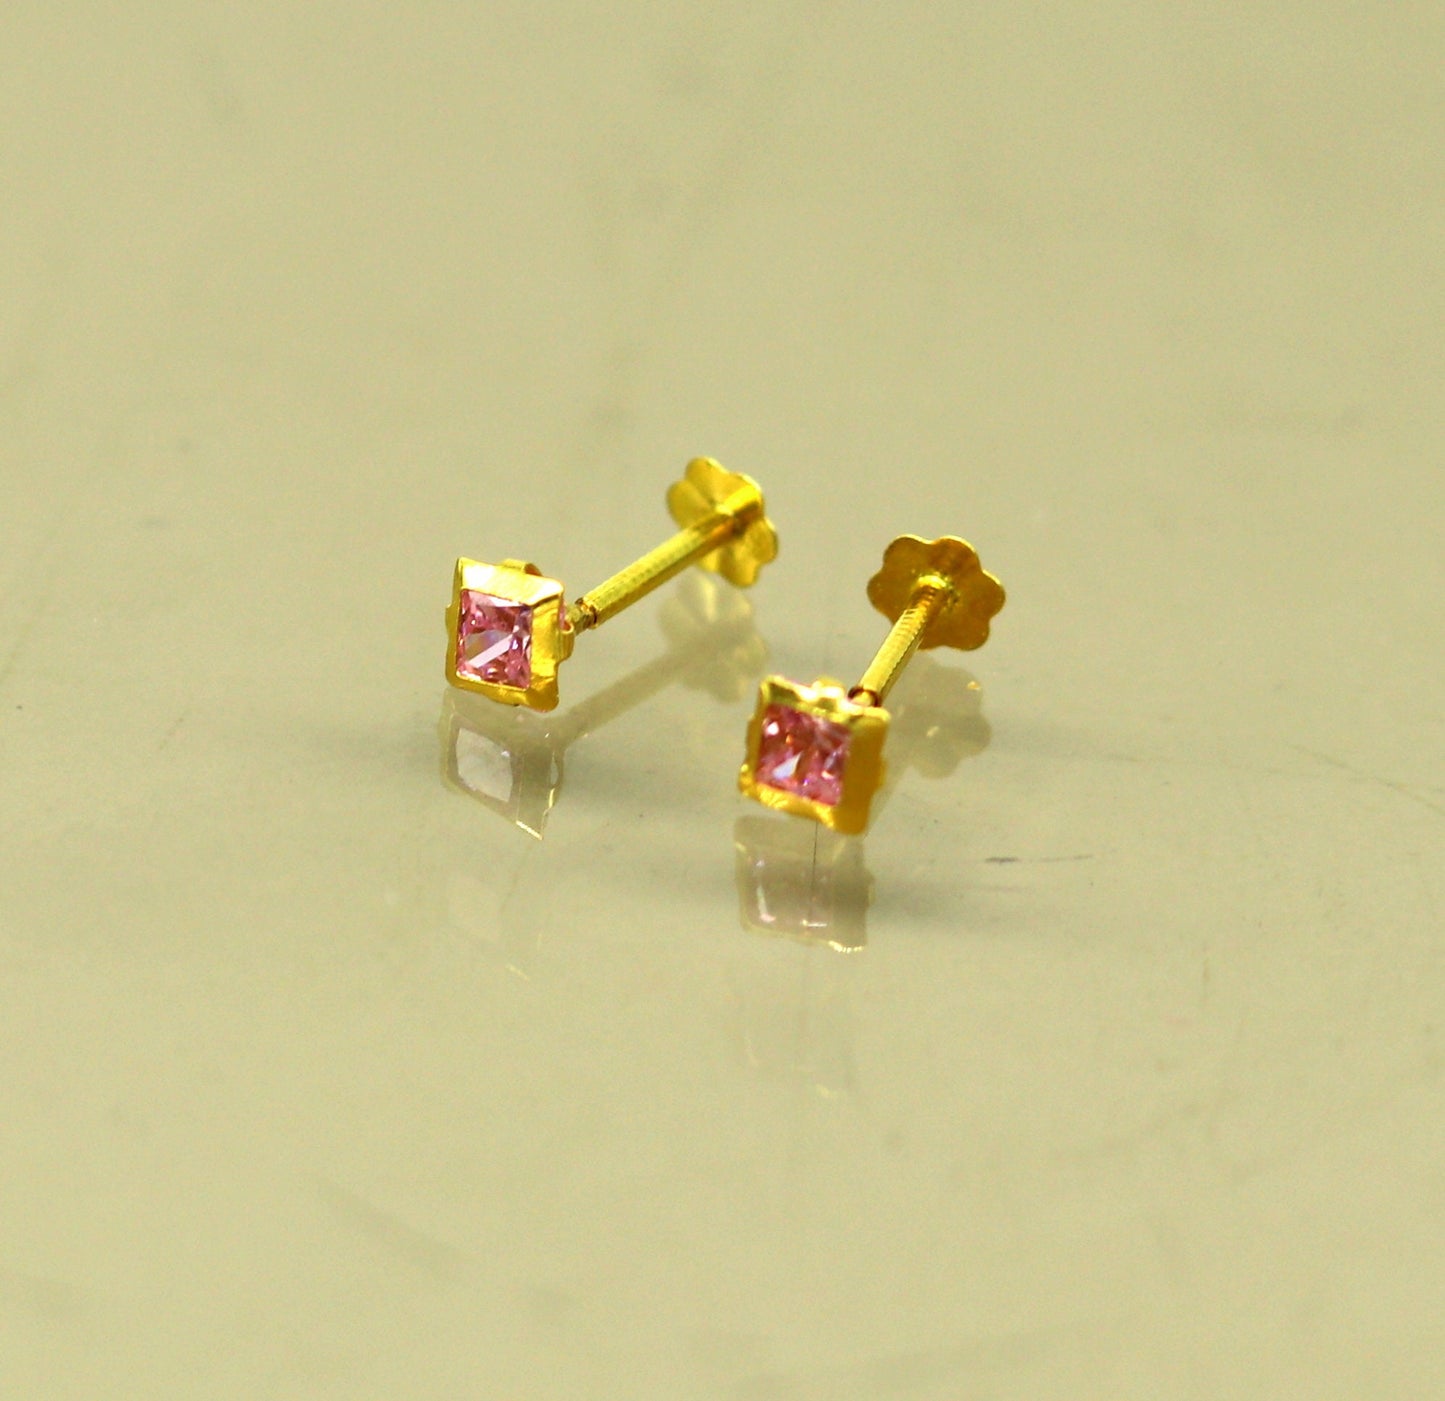 3mm tiny single pink stone handmade 18kt yellow gold combo jewelry we can use as stud or nose stud , baby stud cartilage jewelry er111 - TRIBAL ORNAMENTS